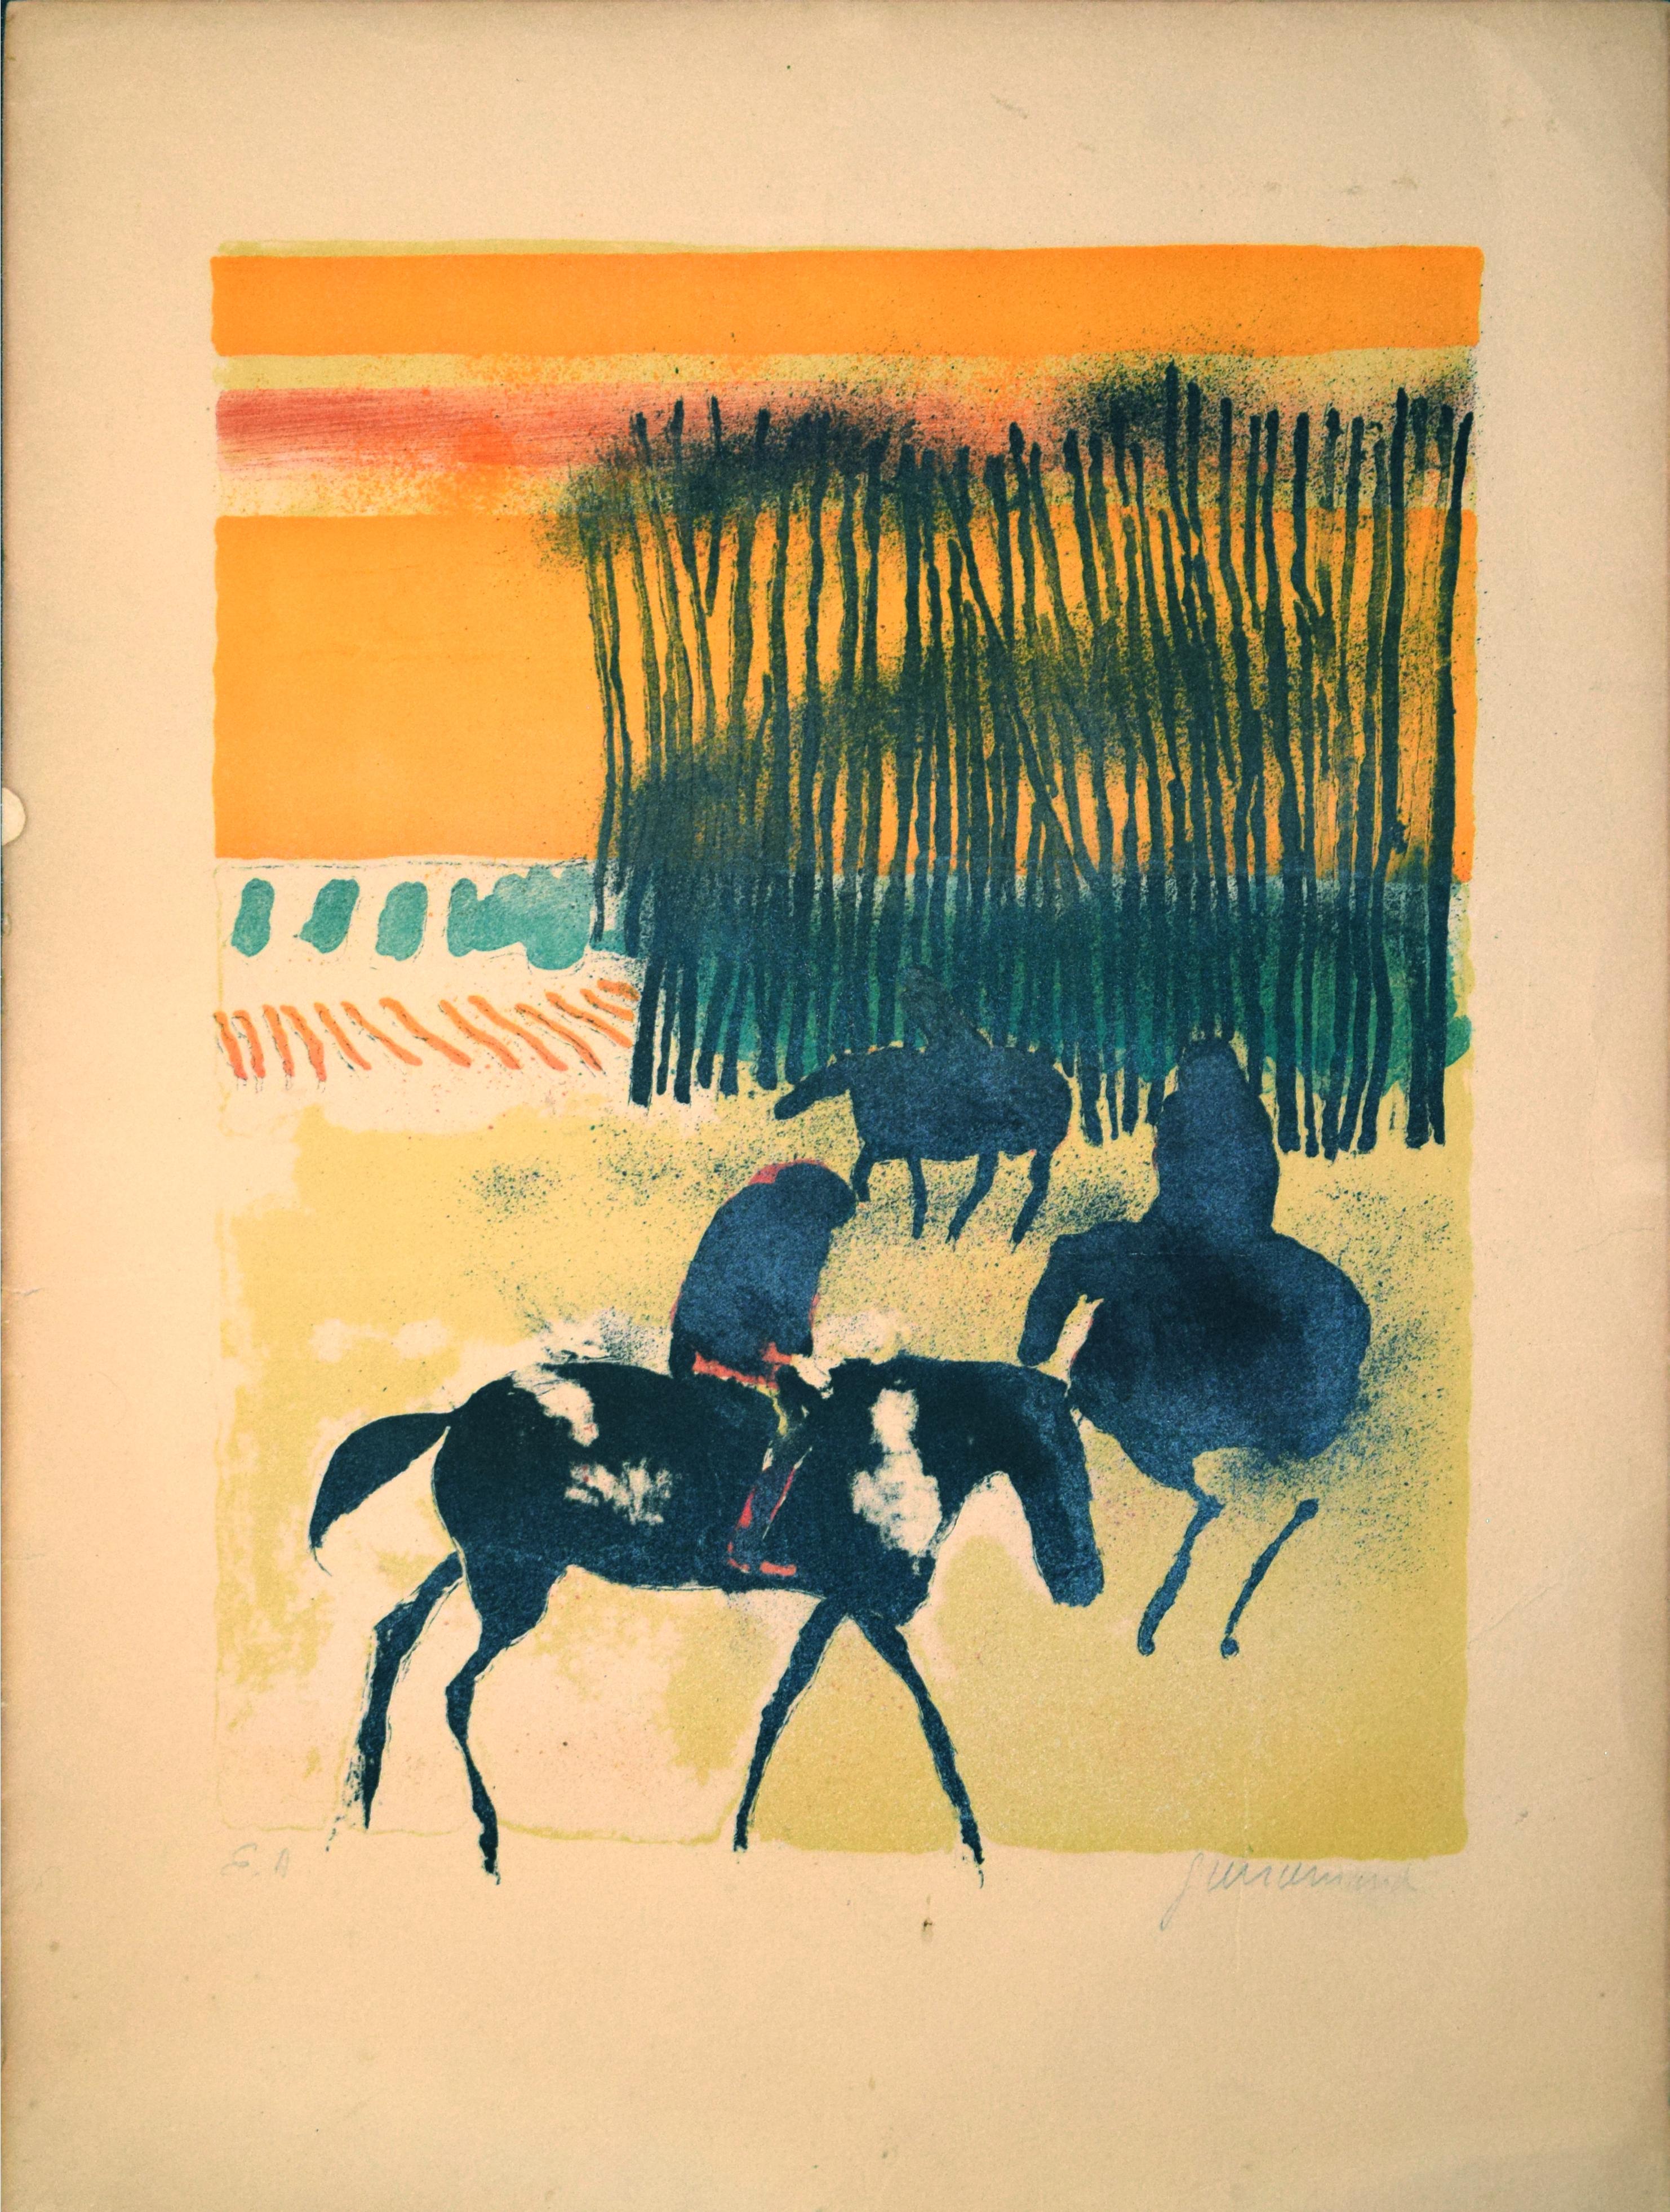 Horses in the Sun is an original artwork realized by Paul Guiramand in the first half of the XX century. Lithograph on paper. 

Hand-signed in pencil on the lower right corner.

Fair conditions.

The artwork represents an abstract landscape with two